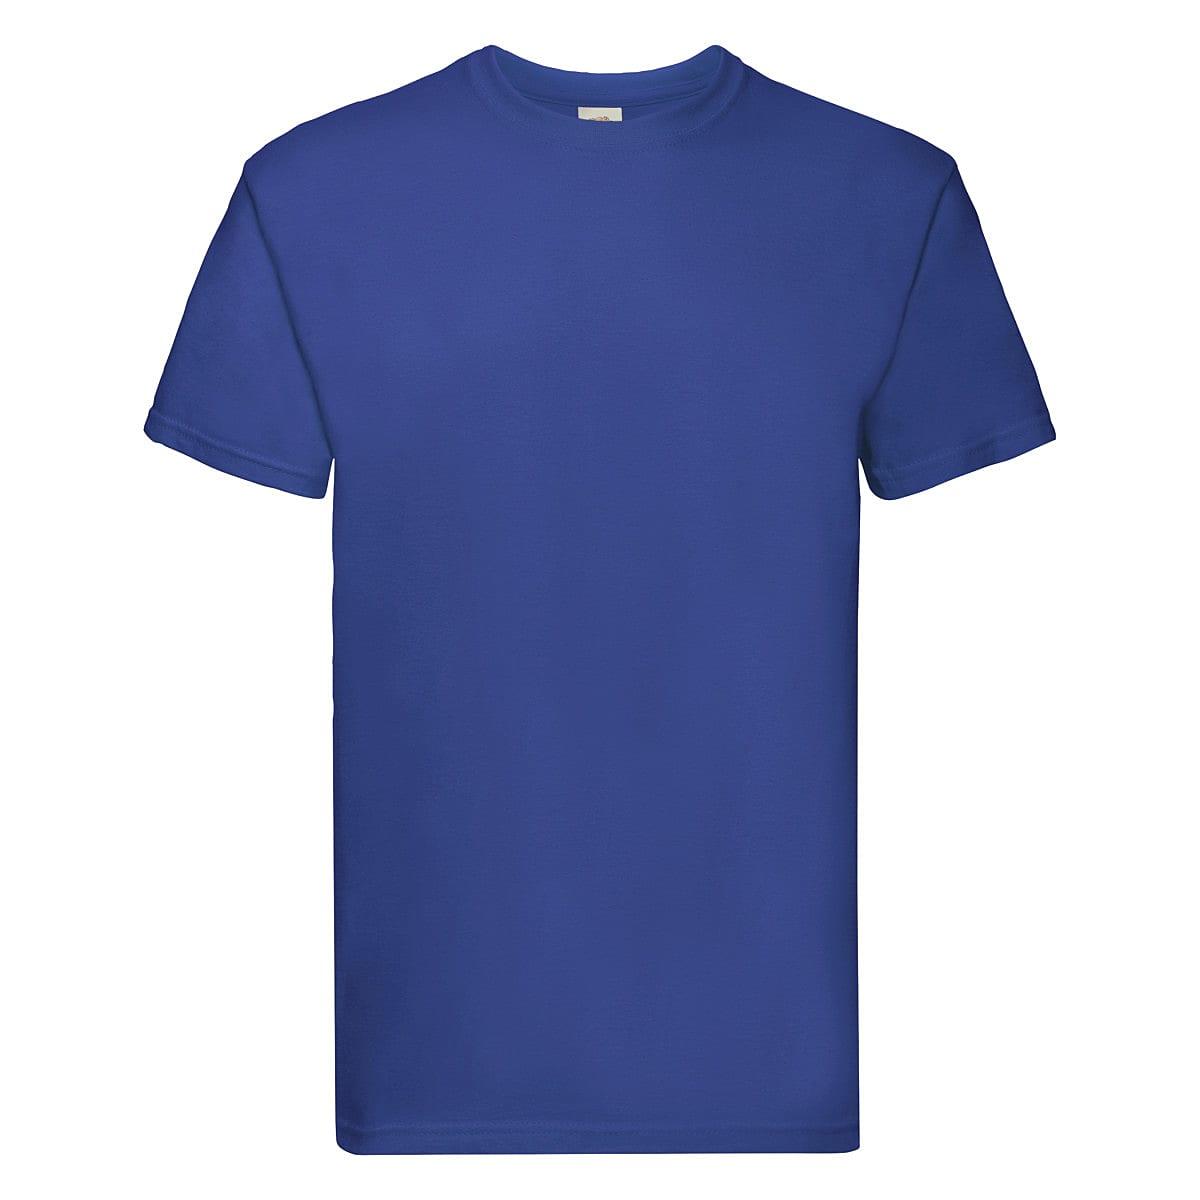 Fruit Of The Loom Super Premium T-Shirt in Royal Blue (Product Code: 61044)